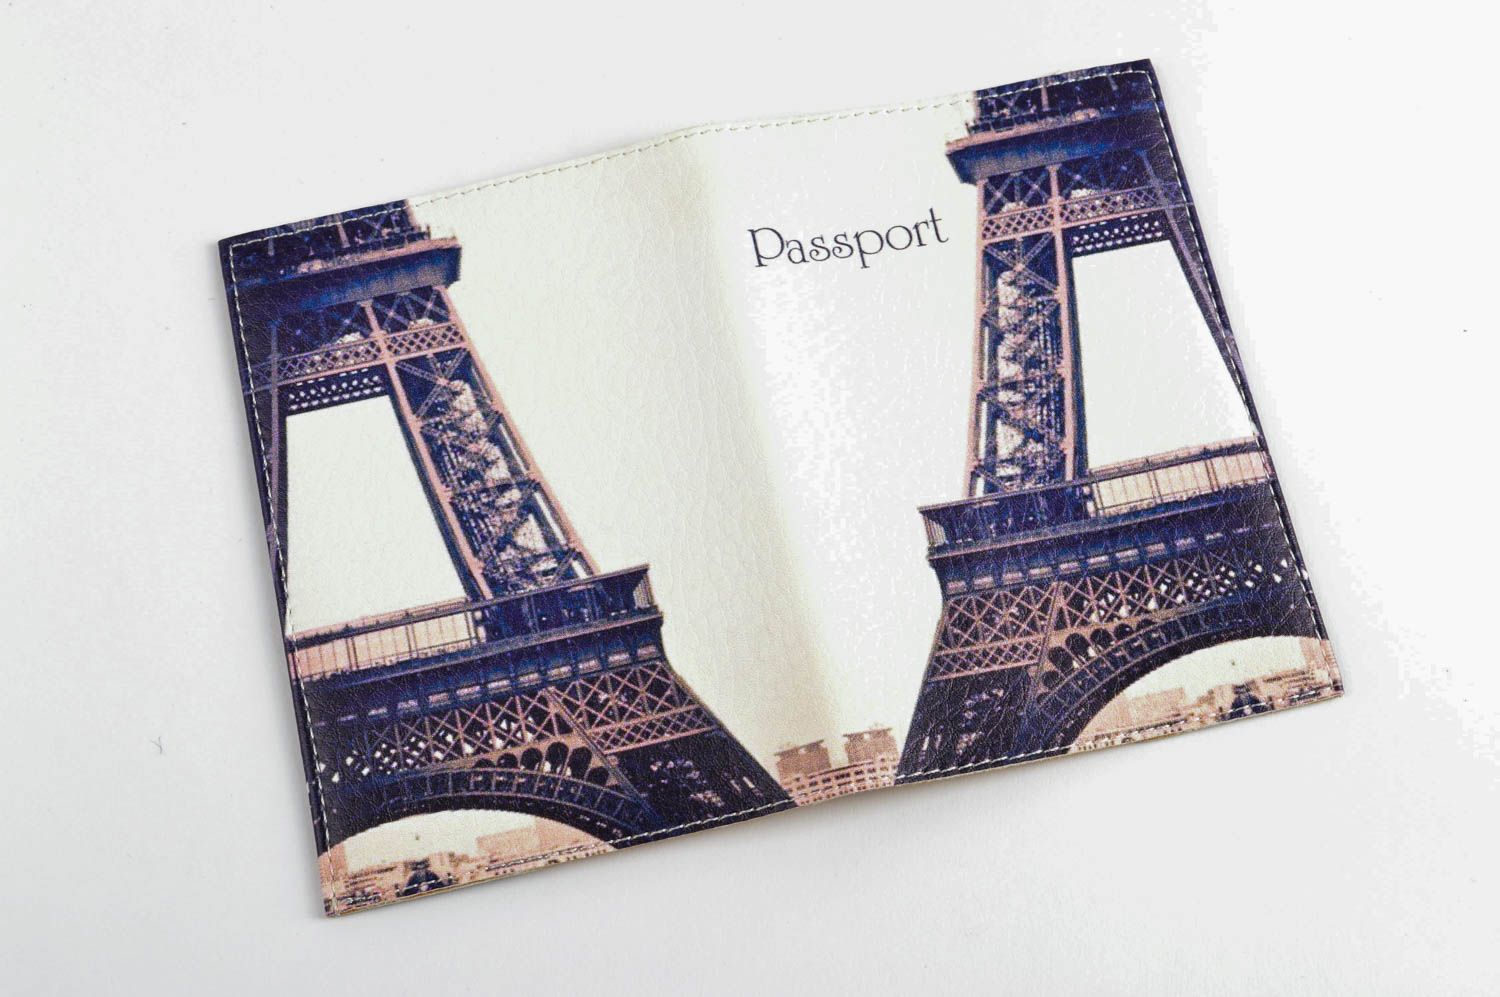 Handmade leather passport cover fashion accessories leather goods birthday gifts photo 4